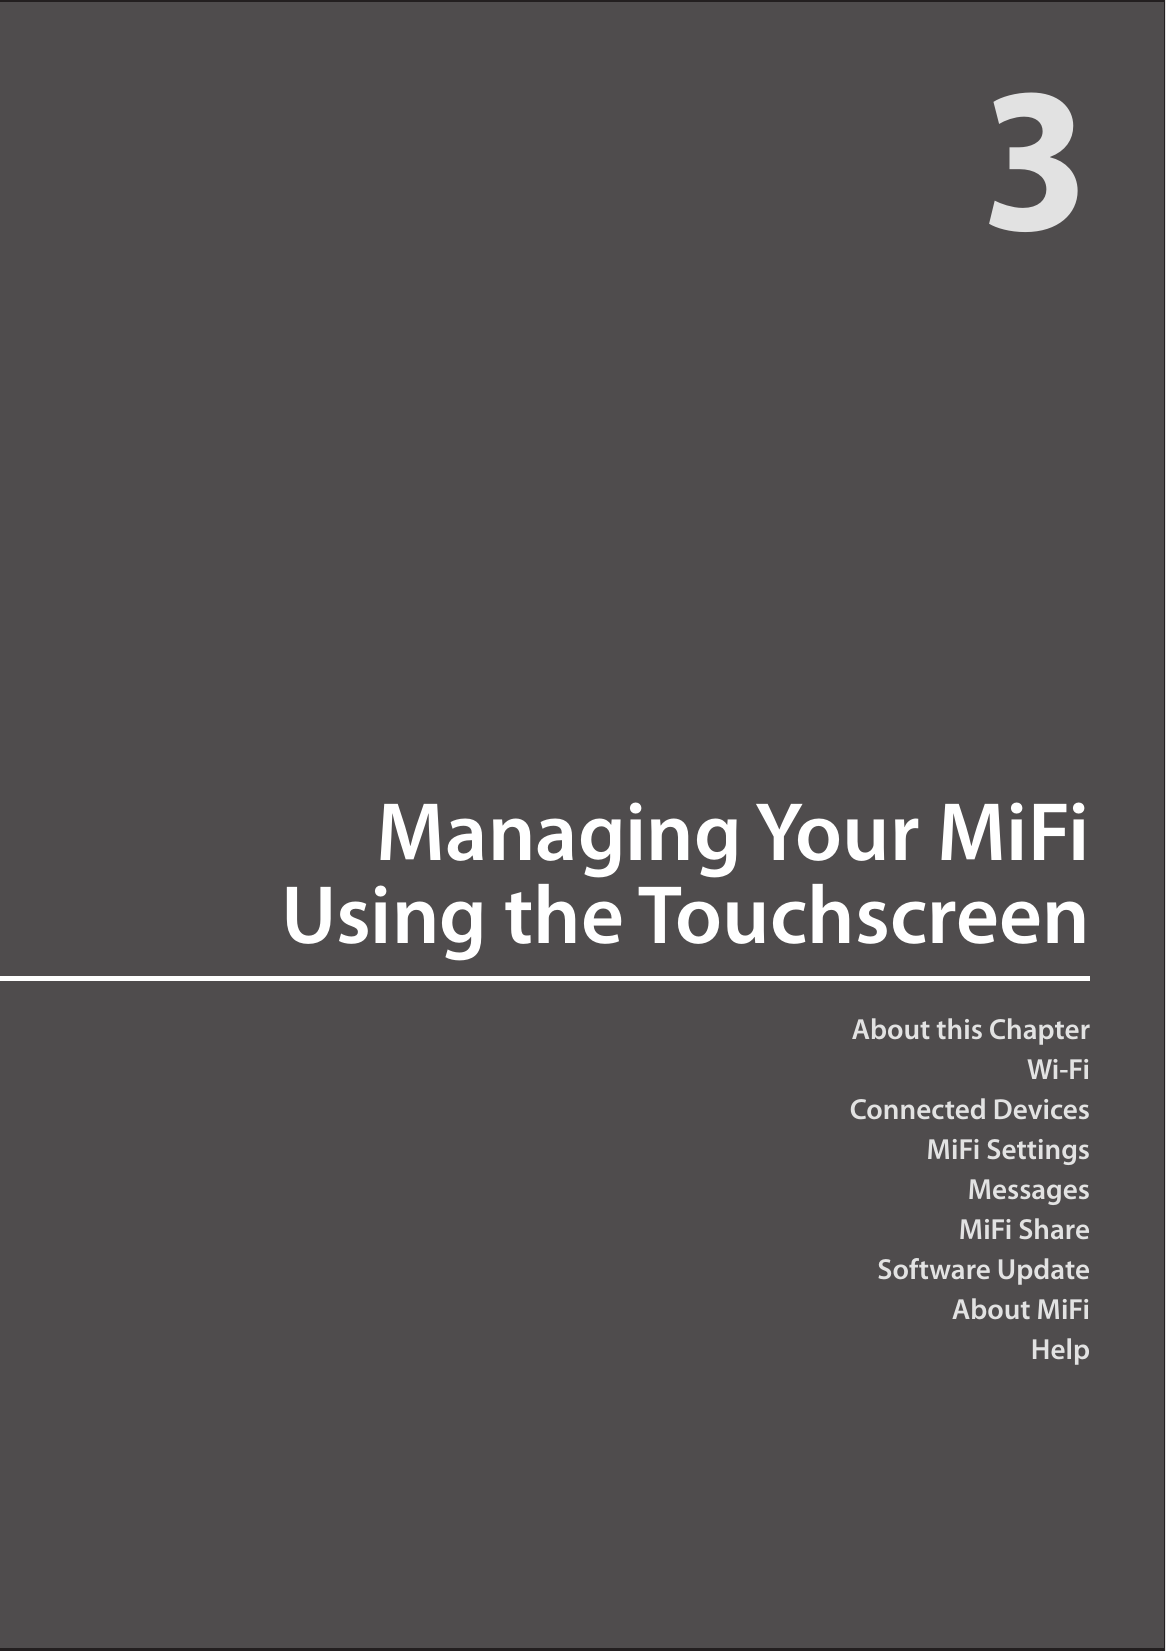 About this ChapterWi-FiConnected DevicesMiFi SettingsMessagesMiFi ShareSoftware UpdateAbout MiFiHelpManaging Your MiFi  Using the Touchscreen3